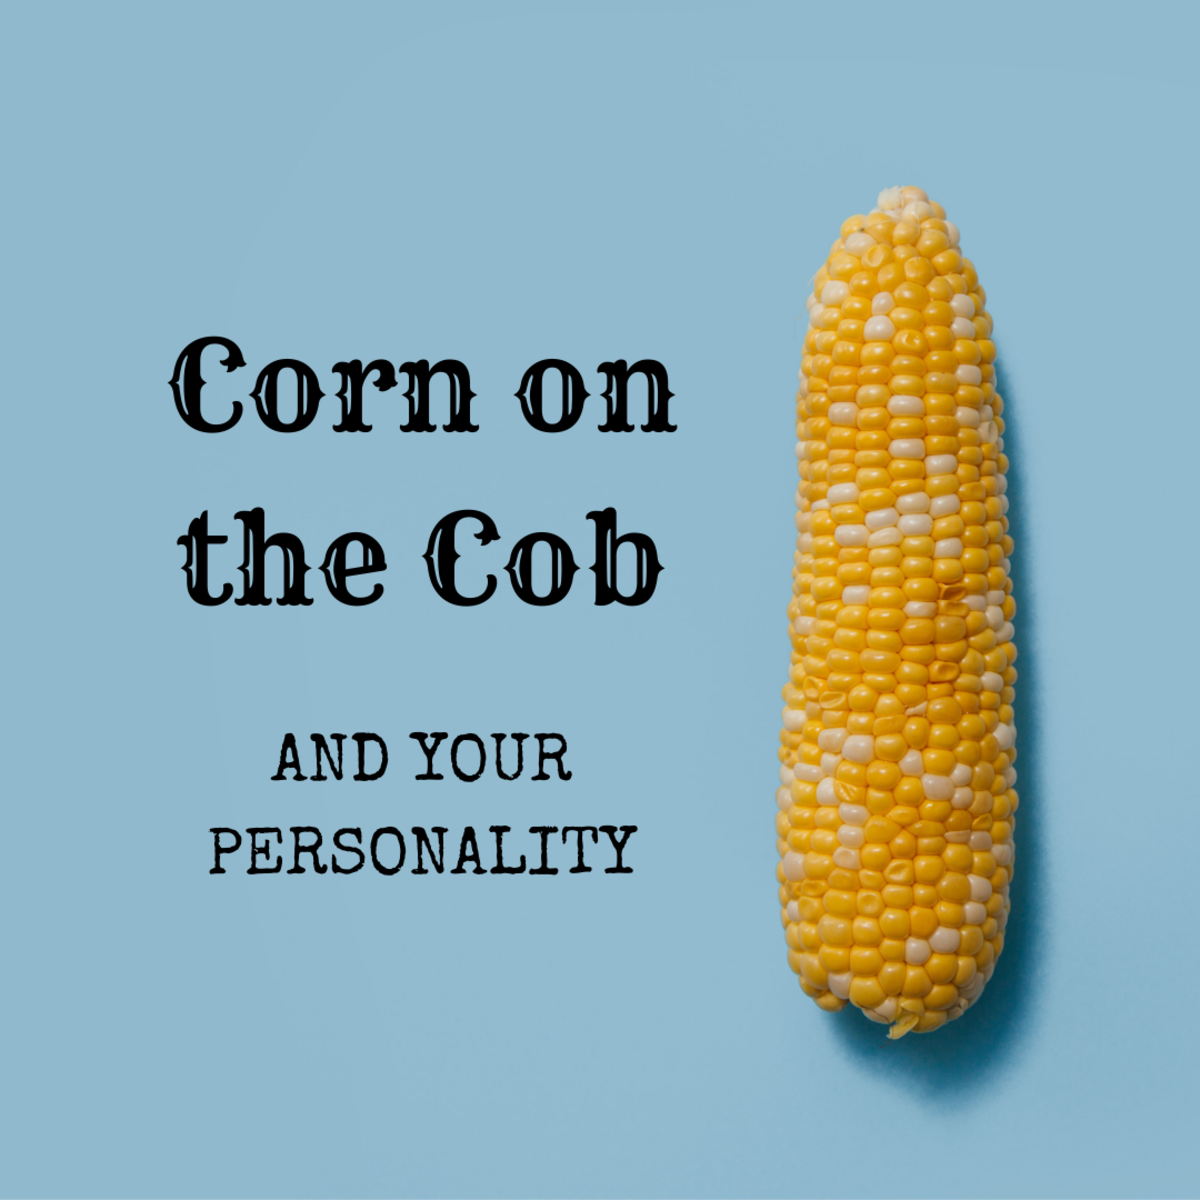 How do you eat corn on the cob?